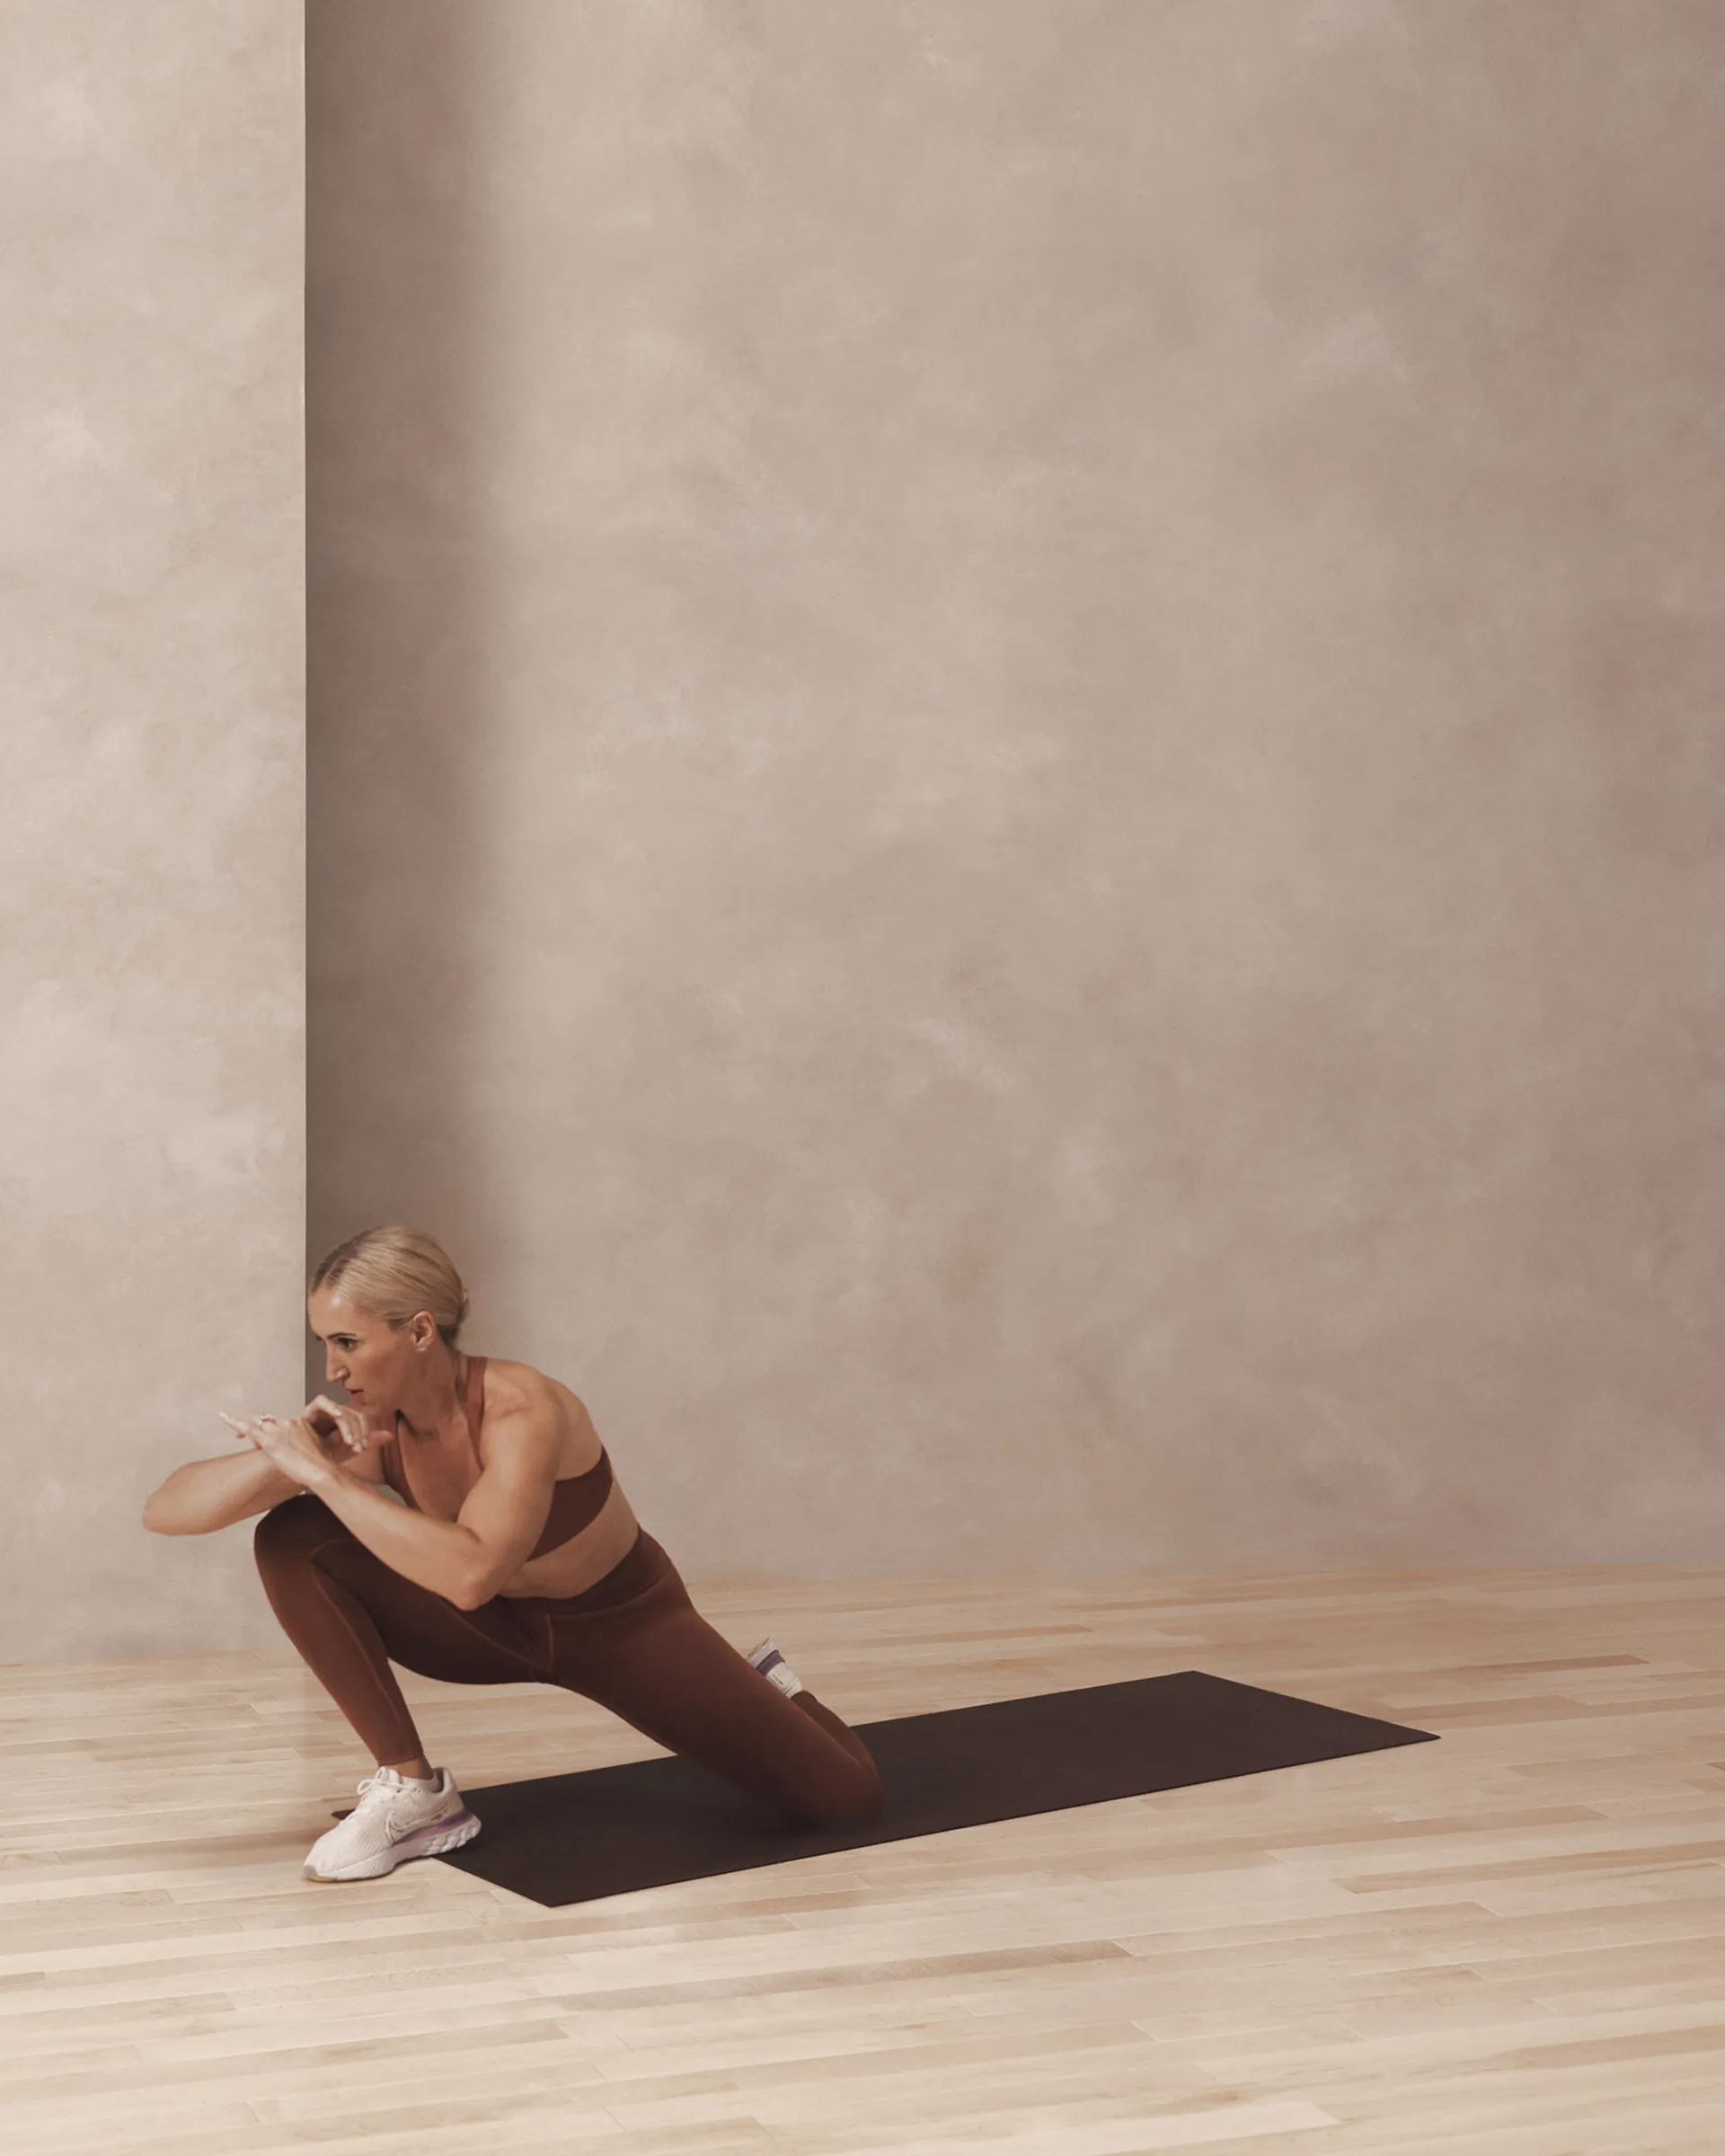 A Life Time member lunging on one knee on a yoga mat.